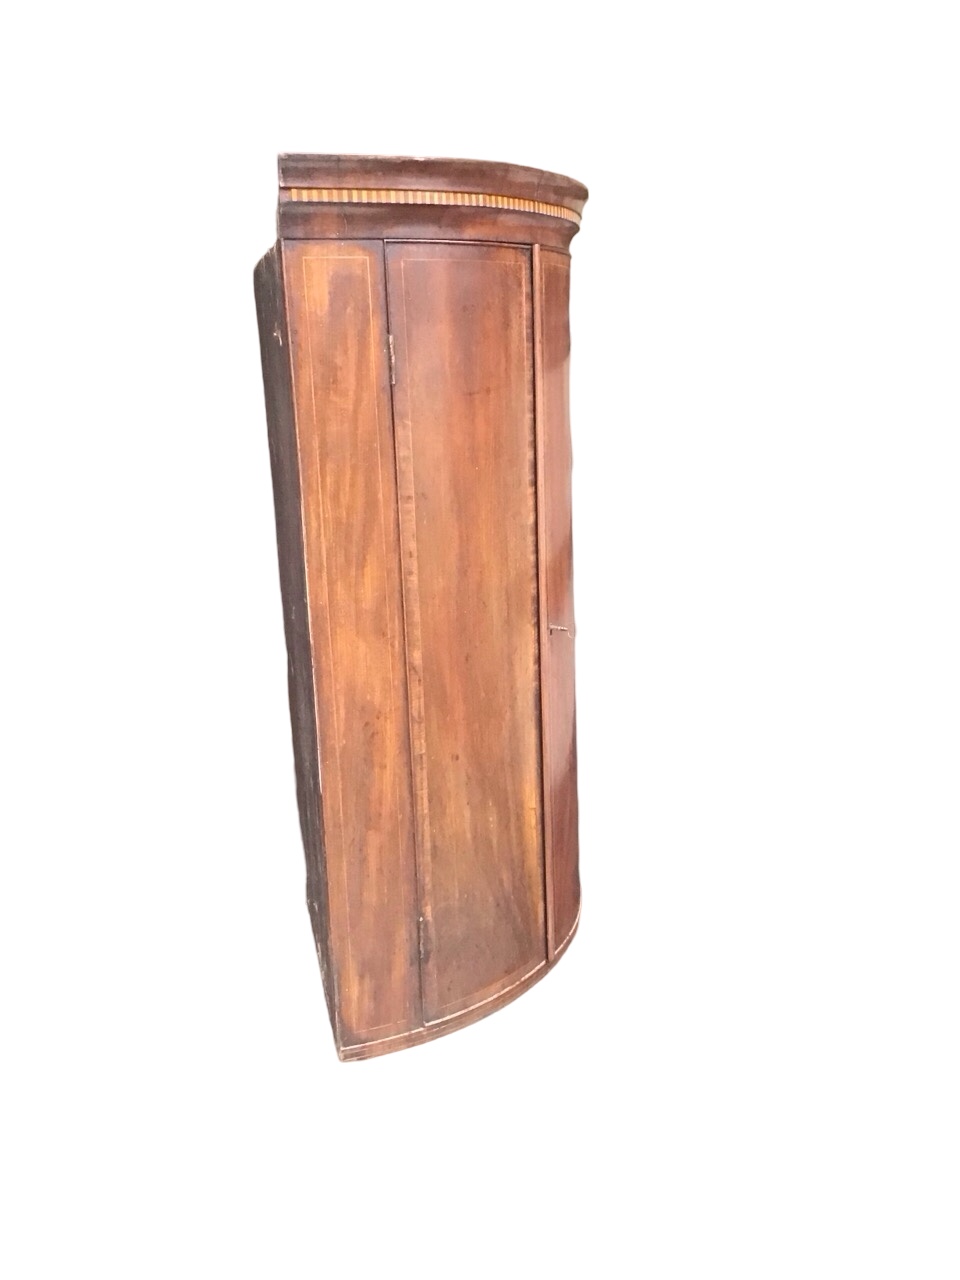 A Georgian mahogany bowfronted hanging corner cabinet with dentil inlaid cornice above a pair of - Image 2 of 3